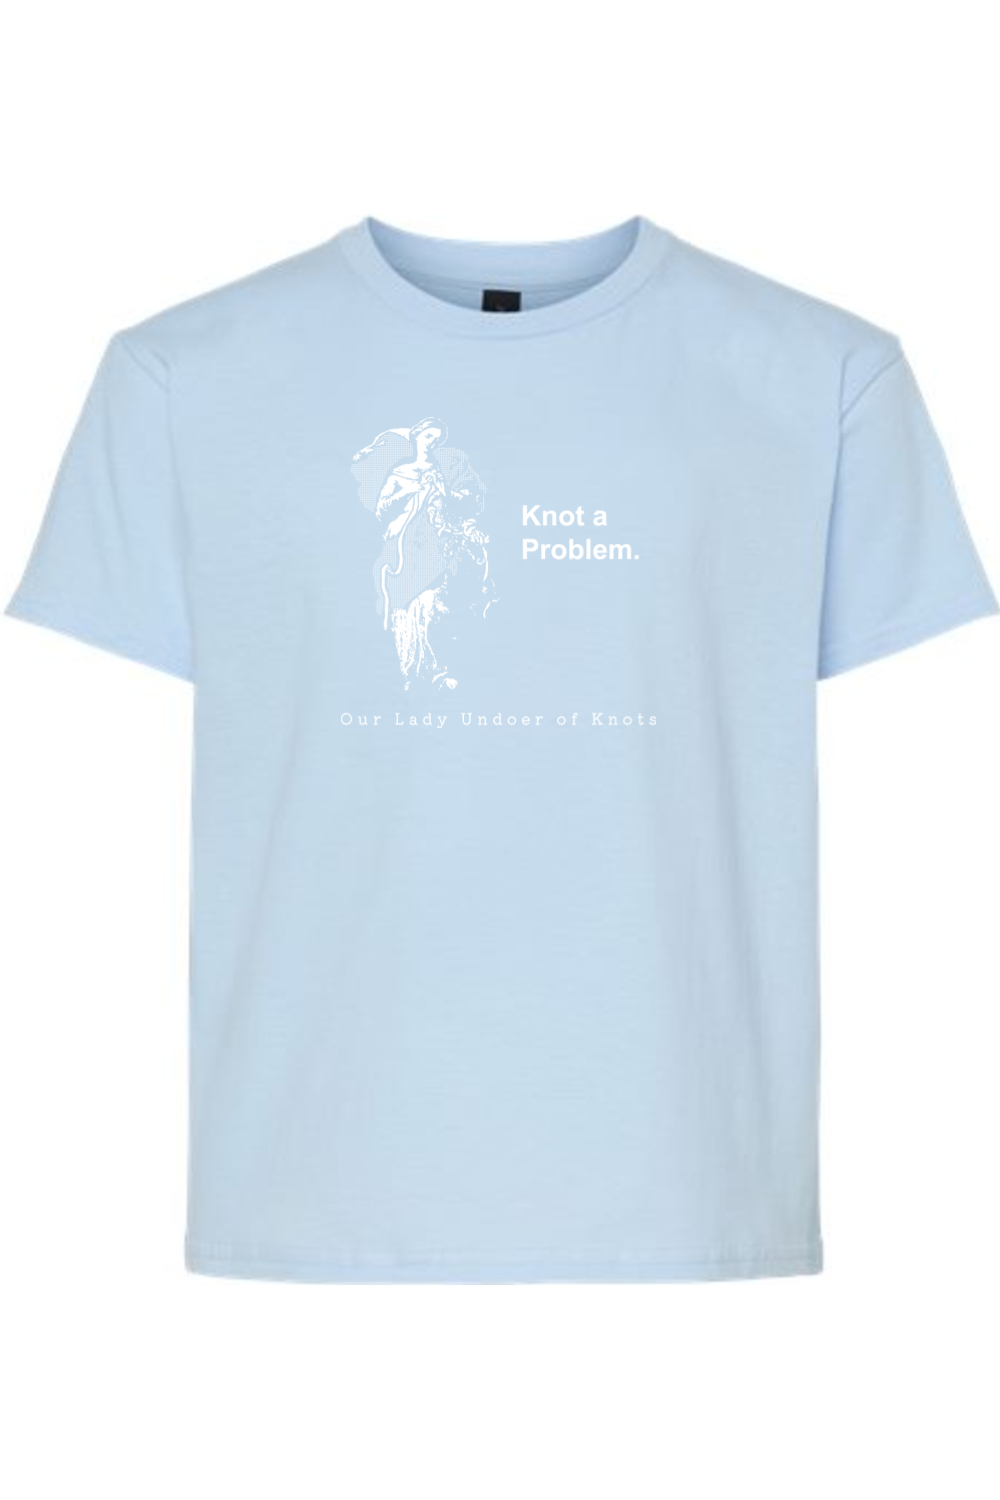 Knot a Problem - Our Lady Undoer of Knots Youth T-Shirt